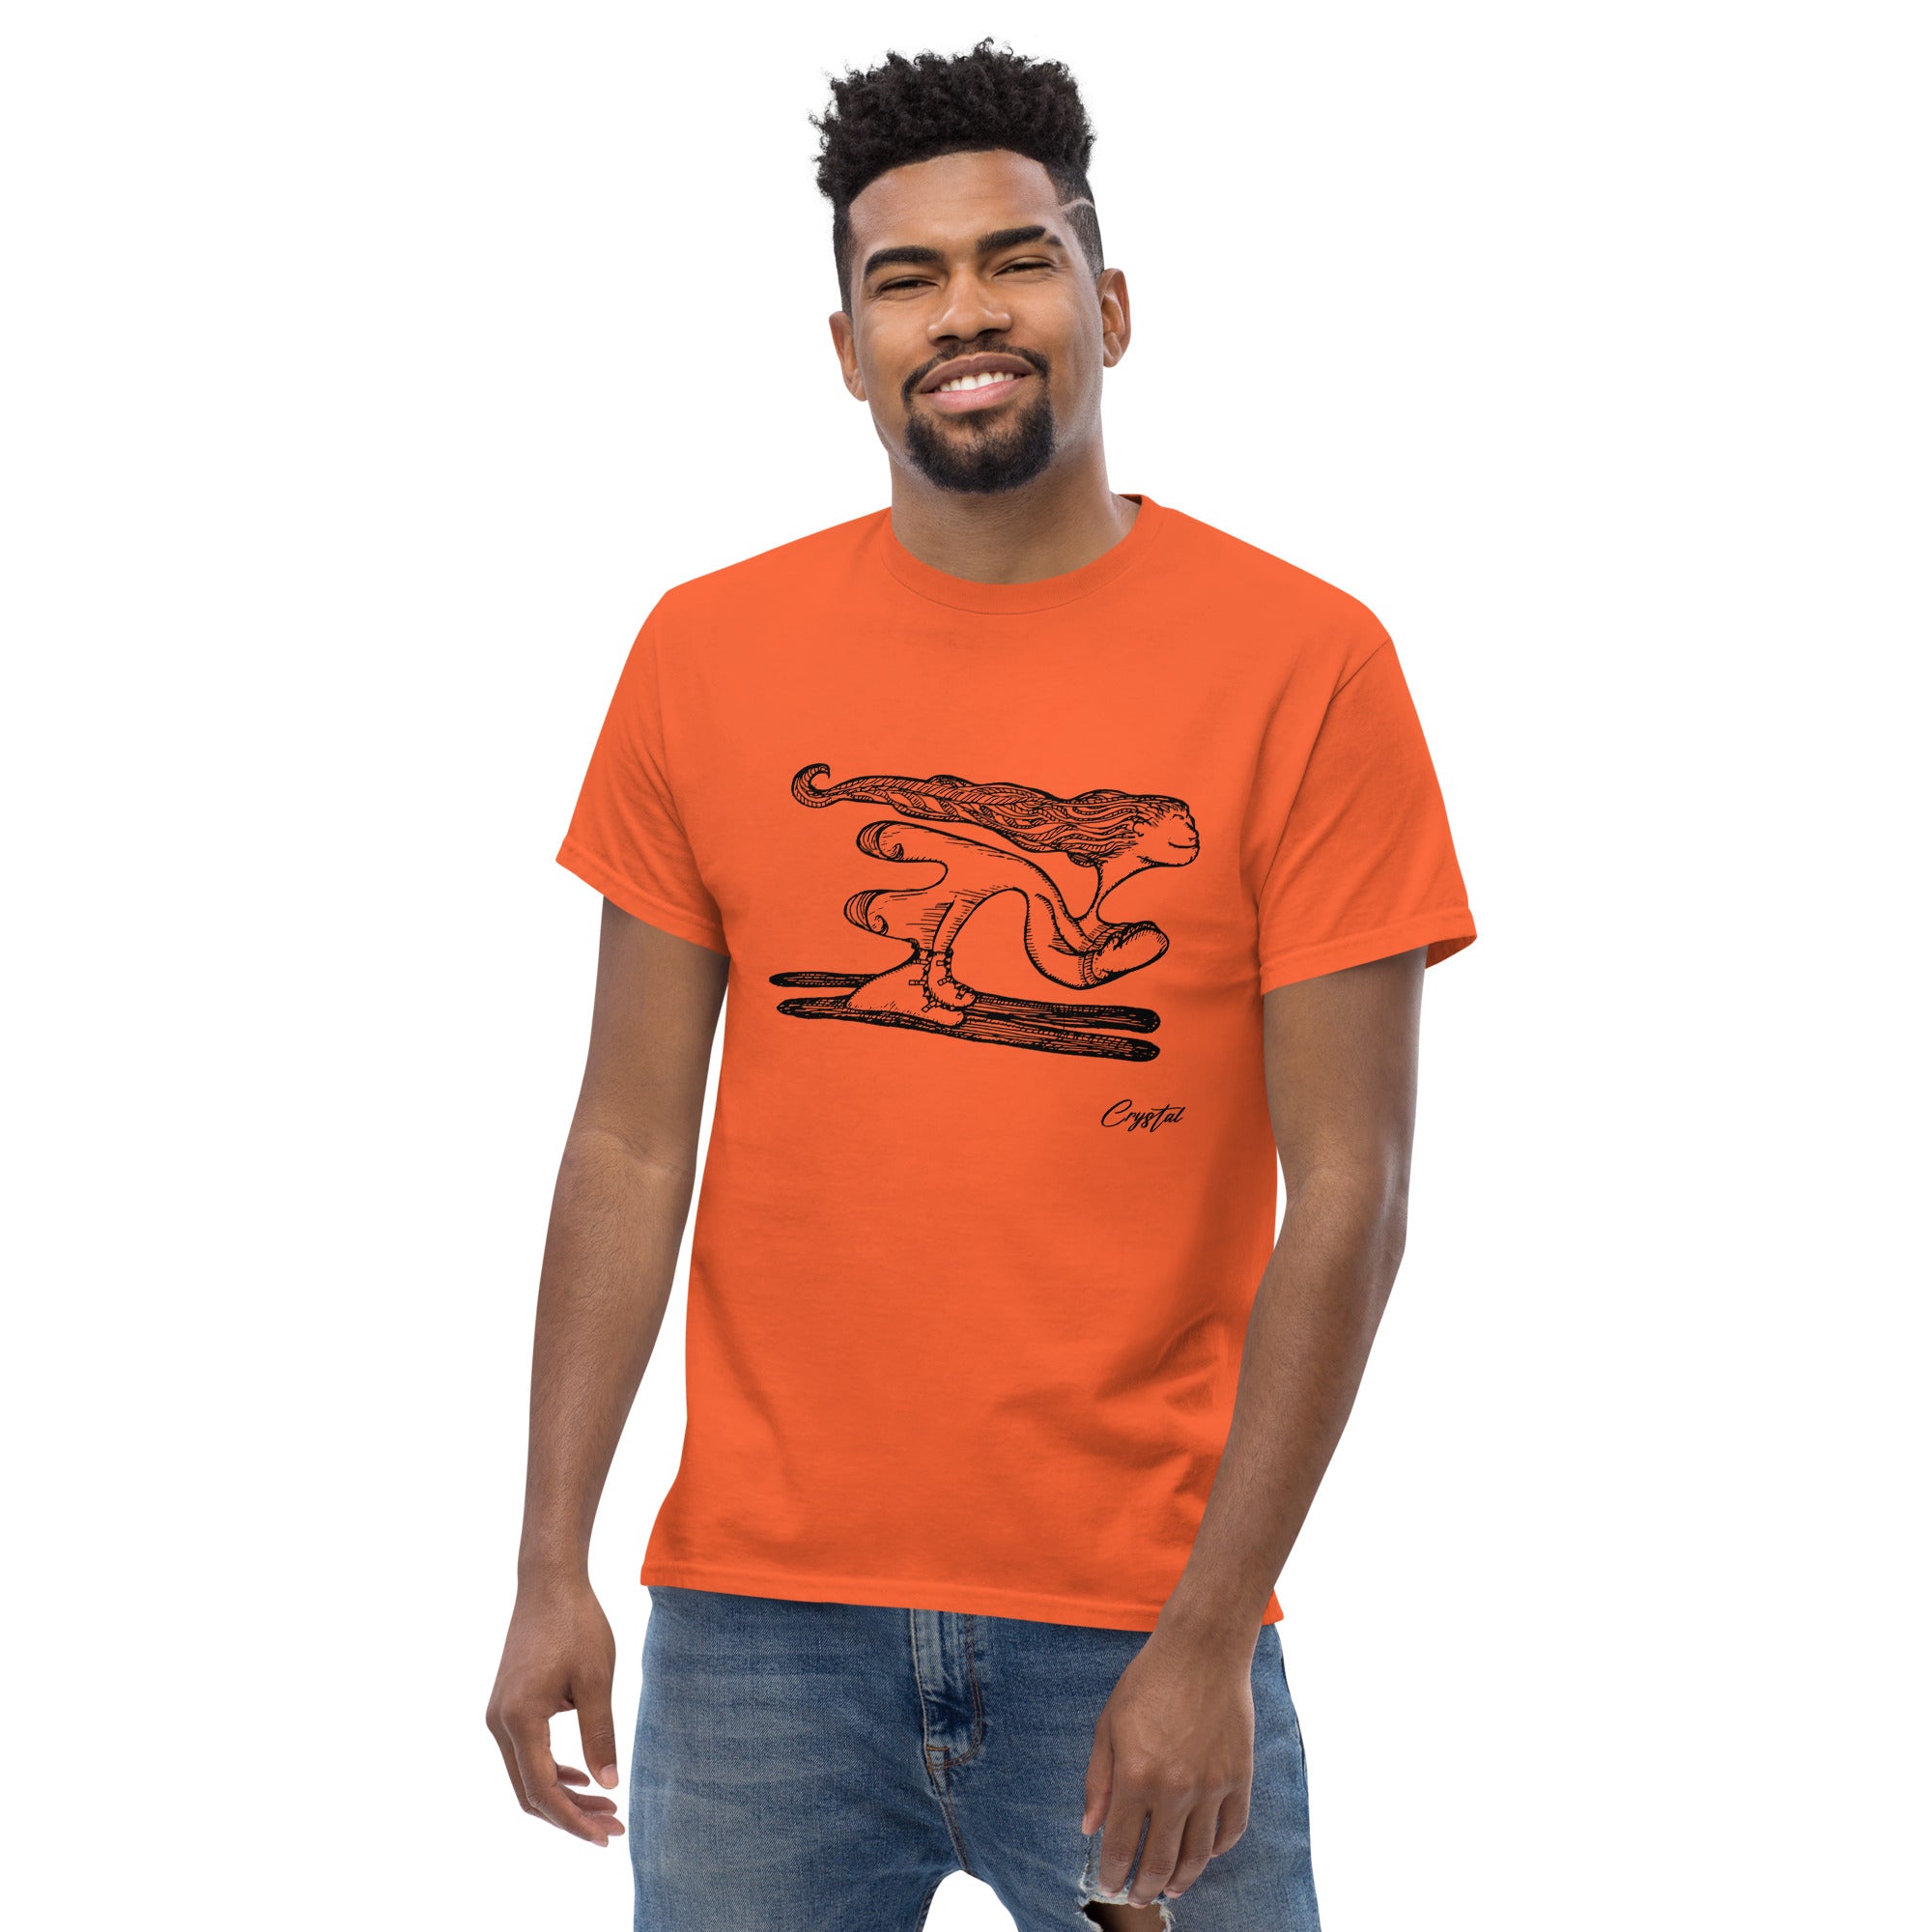 Girl with Great Hair Skiing Snow Slopes and Smiling - Cute & Creepy "Stay Weird" Cartoon Illustration Men's classic tee